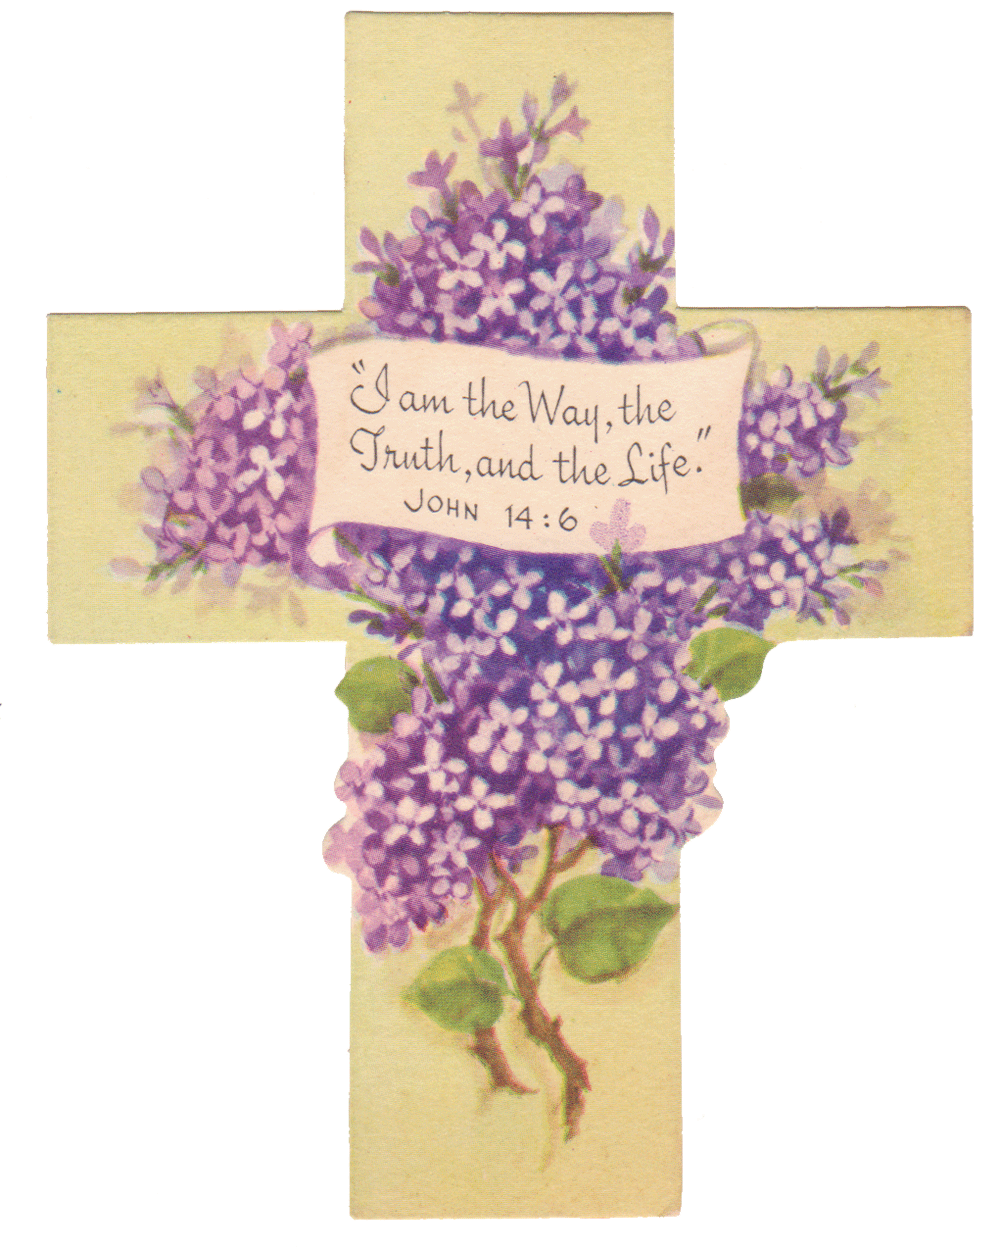 Other Vintage Easter Image Can Be Found In This Post And If You Are